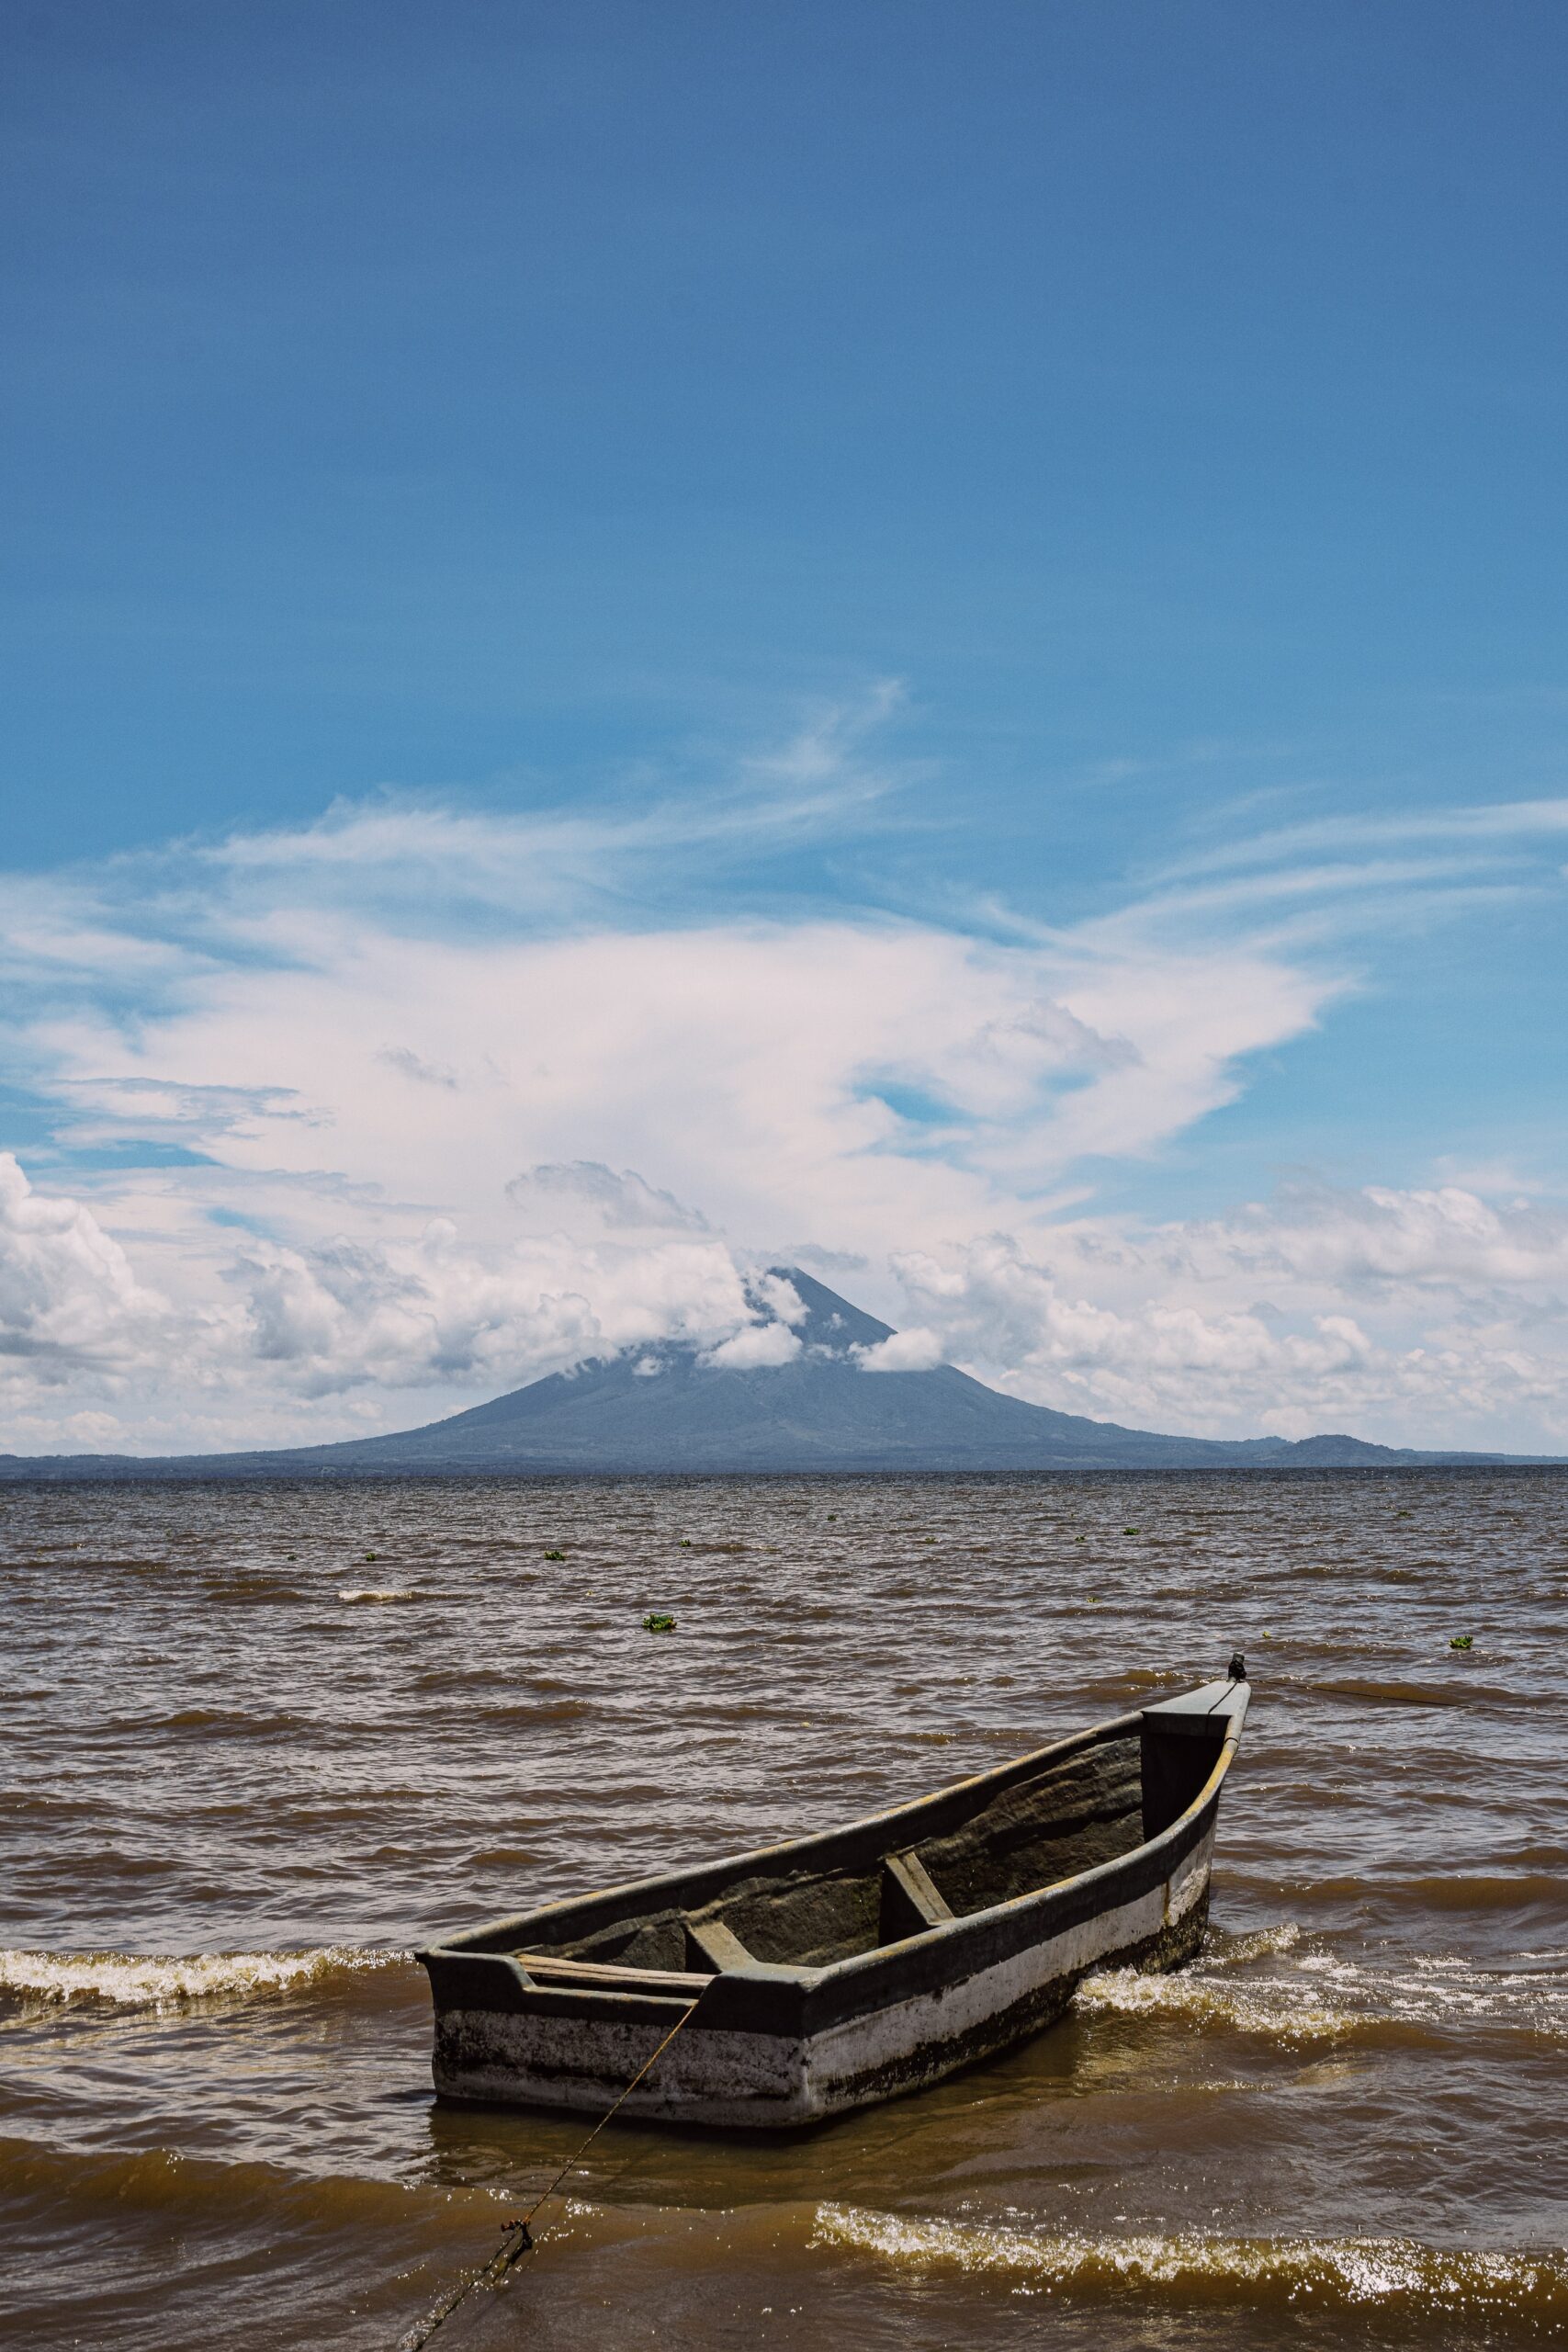 Nicaragua is land of volcanos and lakes. It is one of the popular tourist sites for travel to Central America.